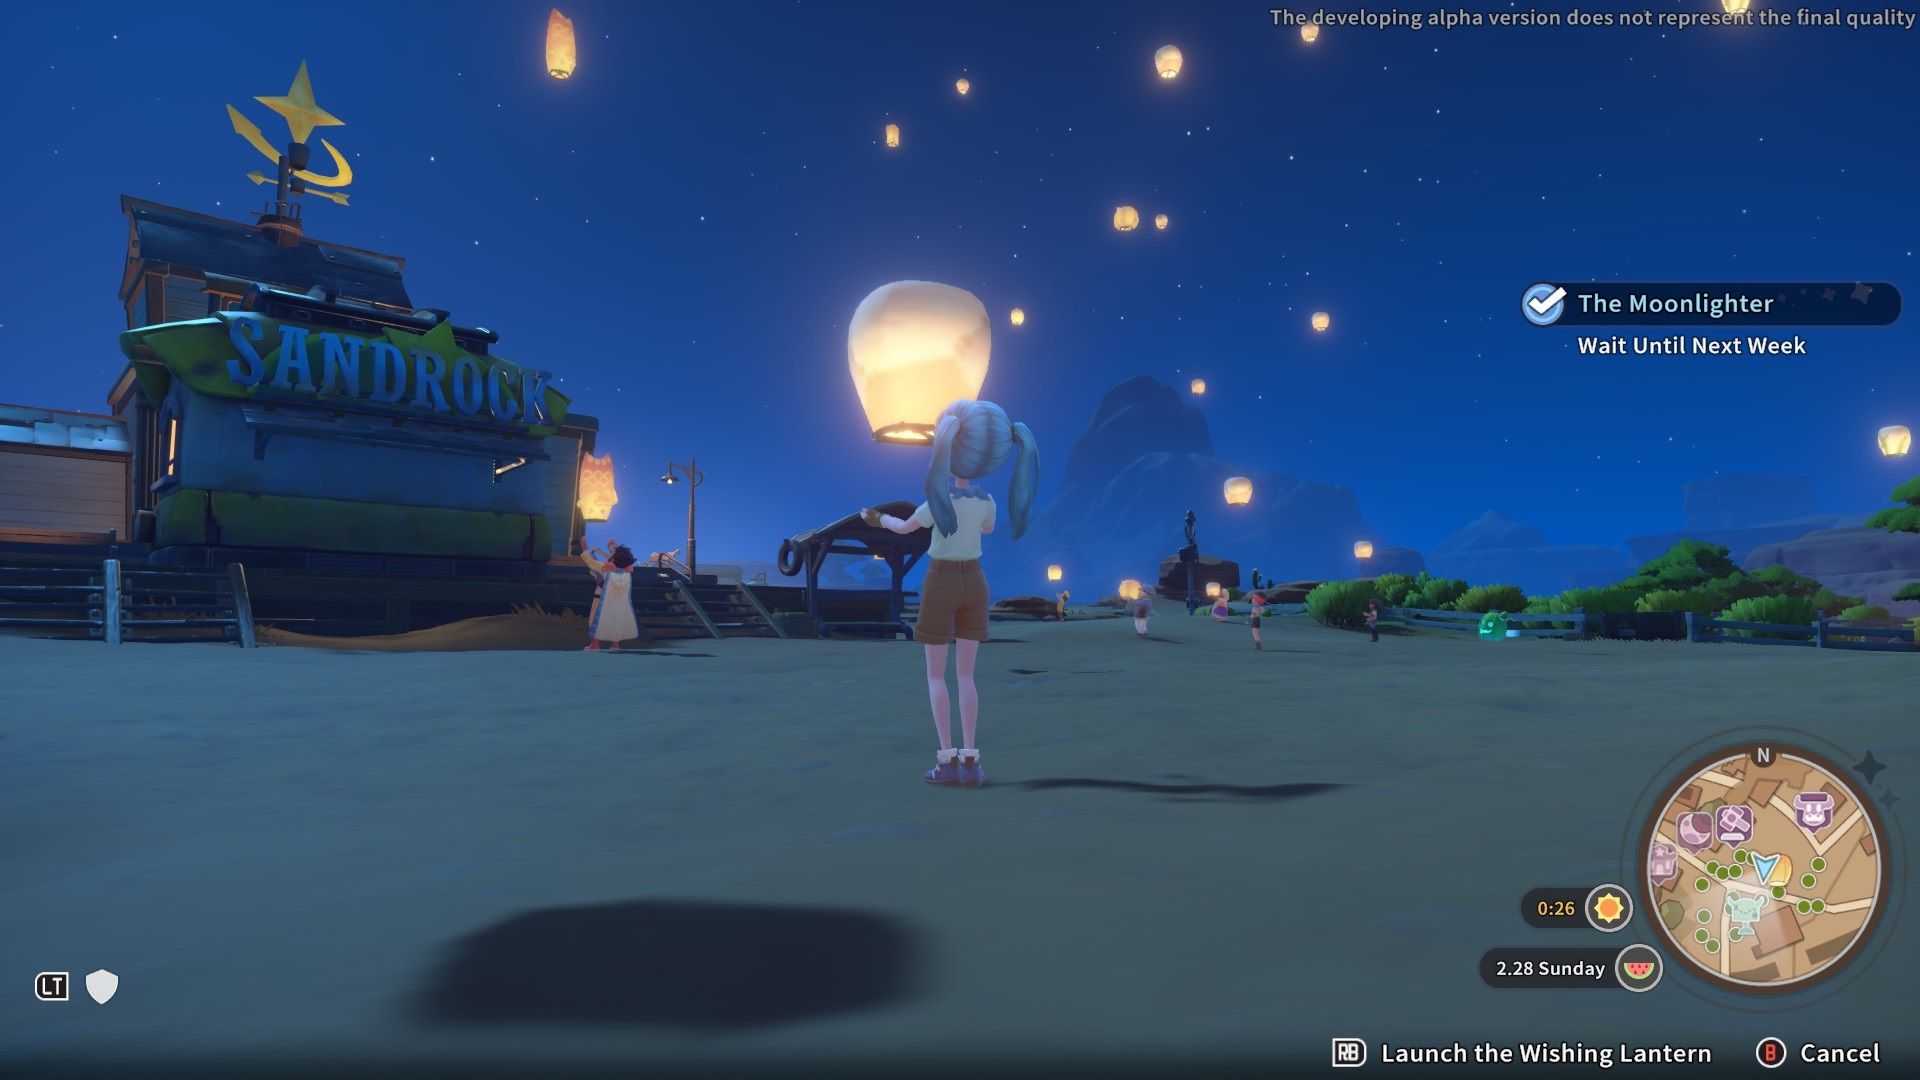 My Time At Sandrock - everyone releasing lanterns for the festival